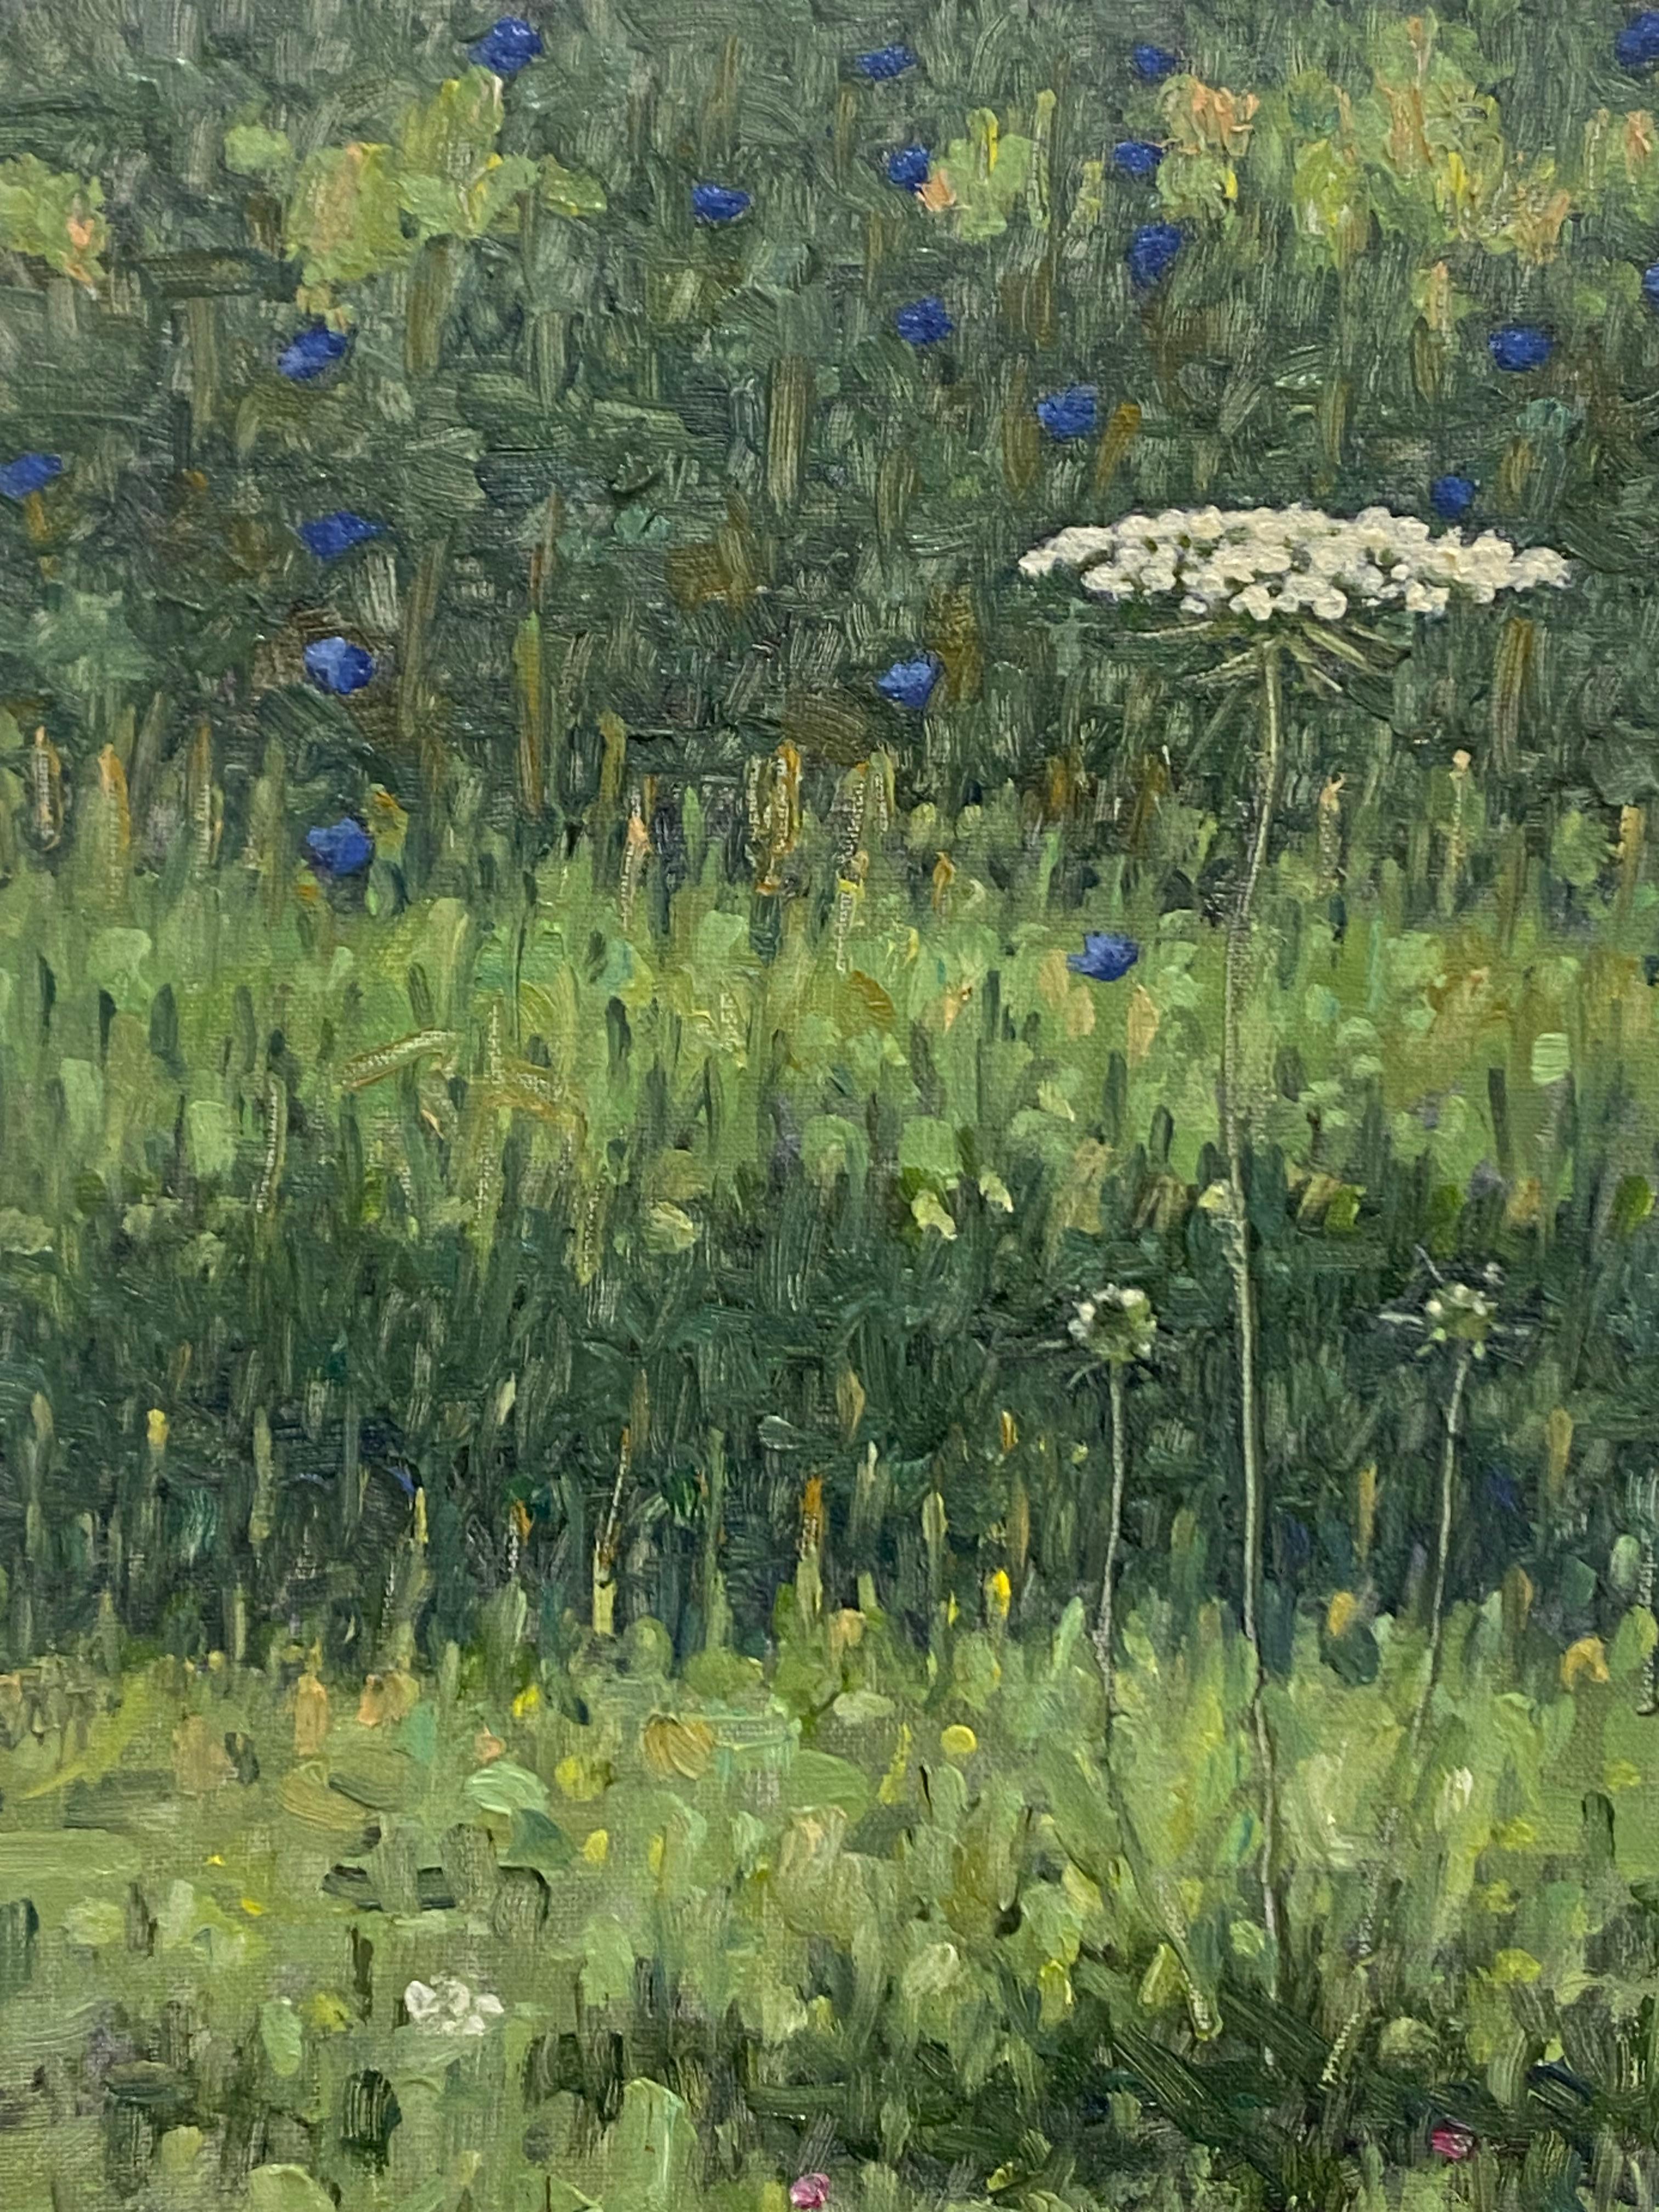 Field Painting August 2 2021, White Queen Anne's Lace, Blue Violet Wildflowers For Sale 1